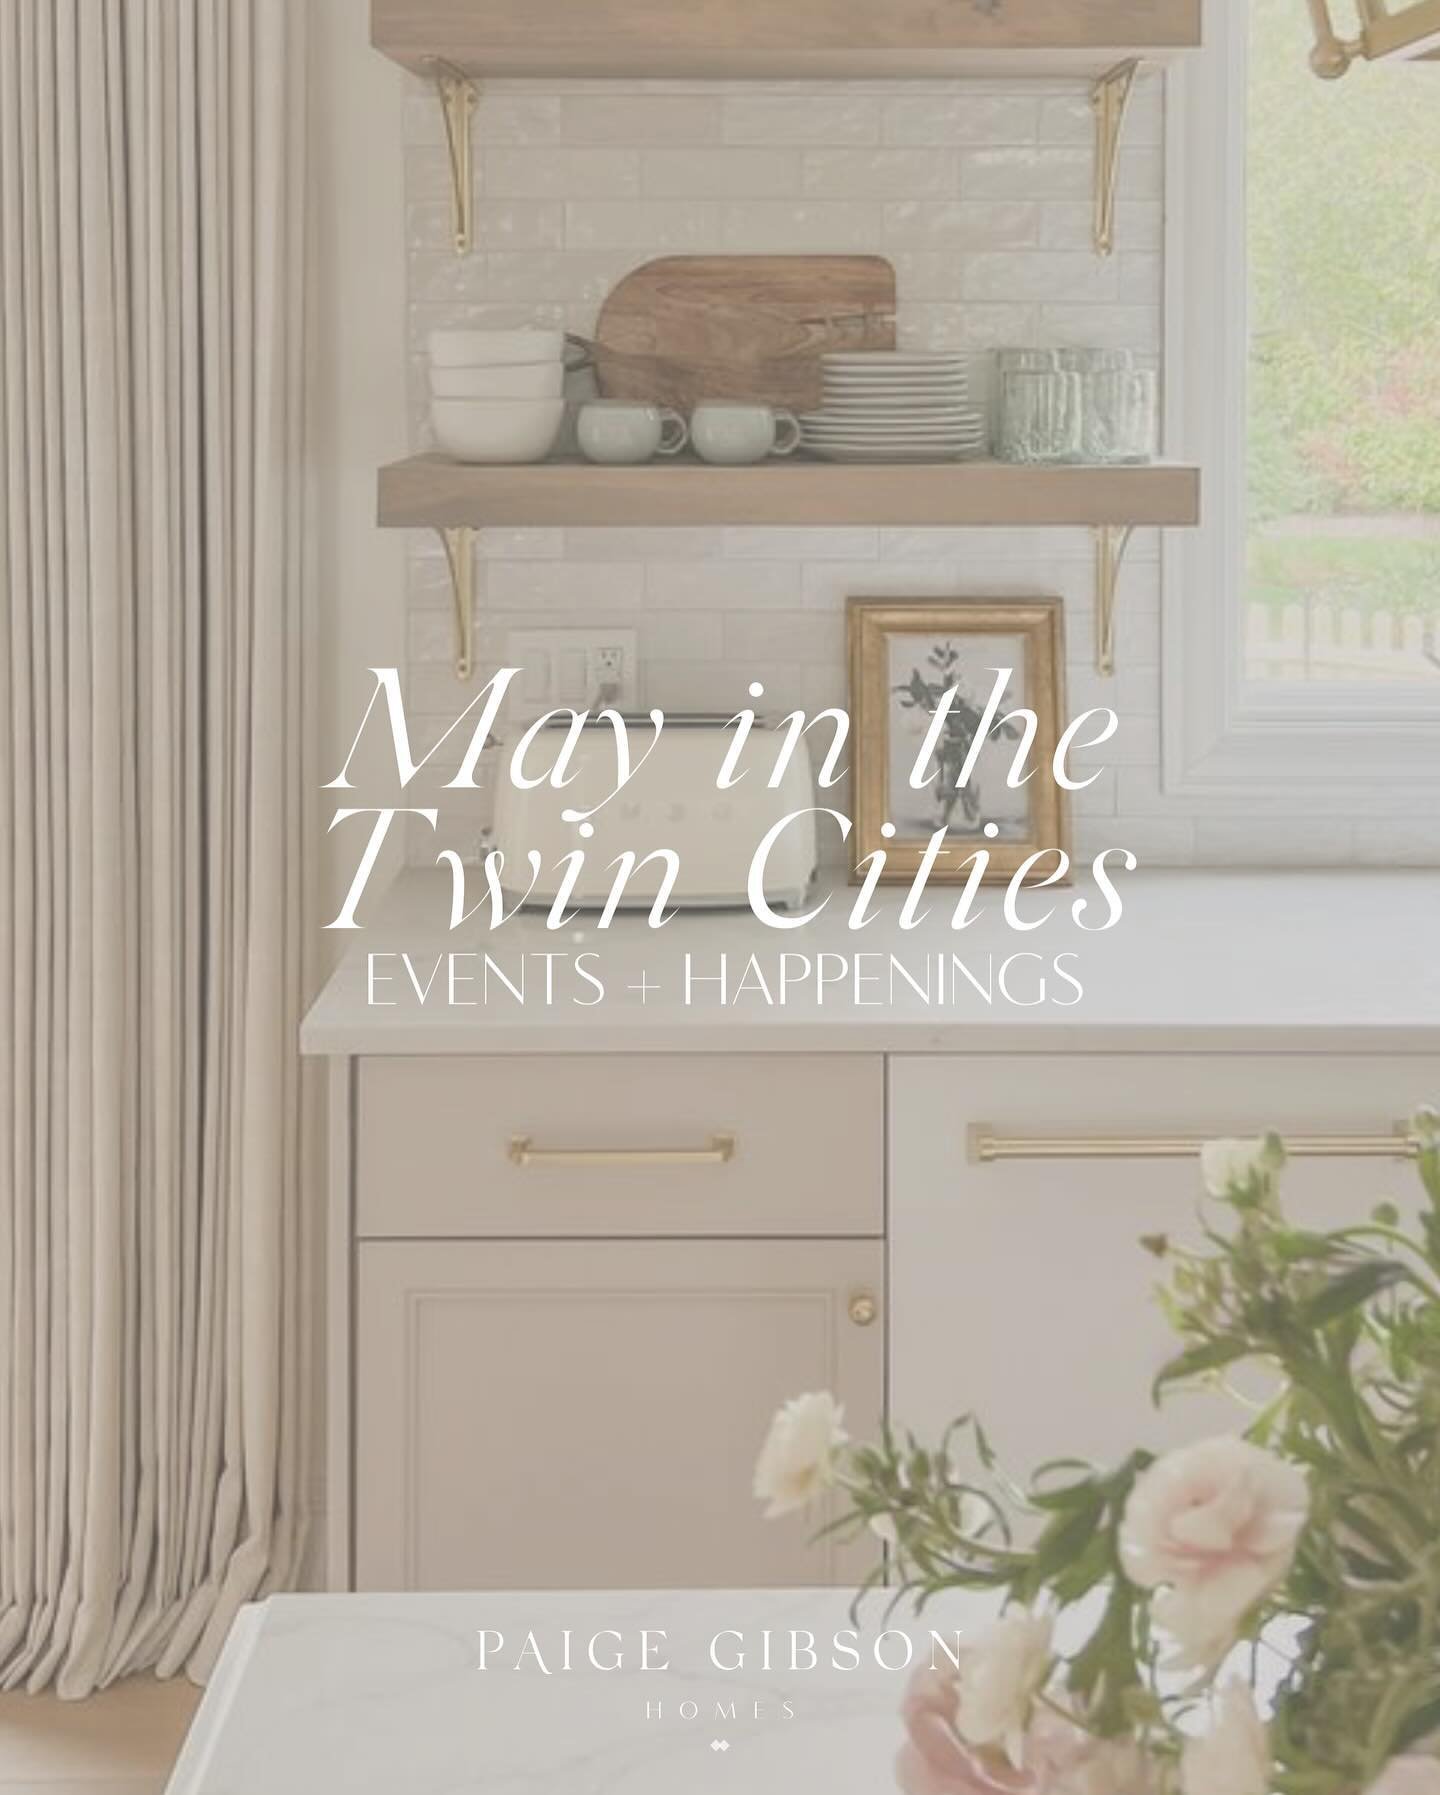 May Happenings! 🤍💐 Spring has sprung! Looking for some fun weekend outings? We have a few ideas for ya ✨

Know of something we missed? Leave them in the comments 👇🏼

&bull;
&bull;
&bull;
#msprealtor #mnrealtor #msprealestate #kellerwilliamsrealty